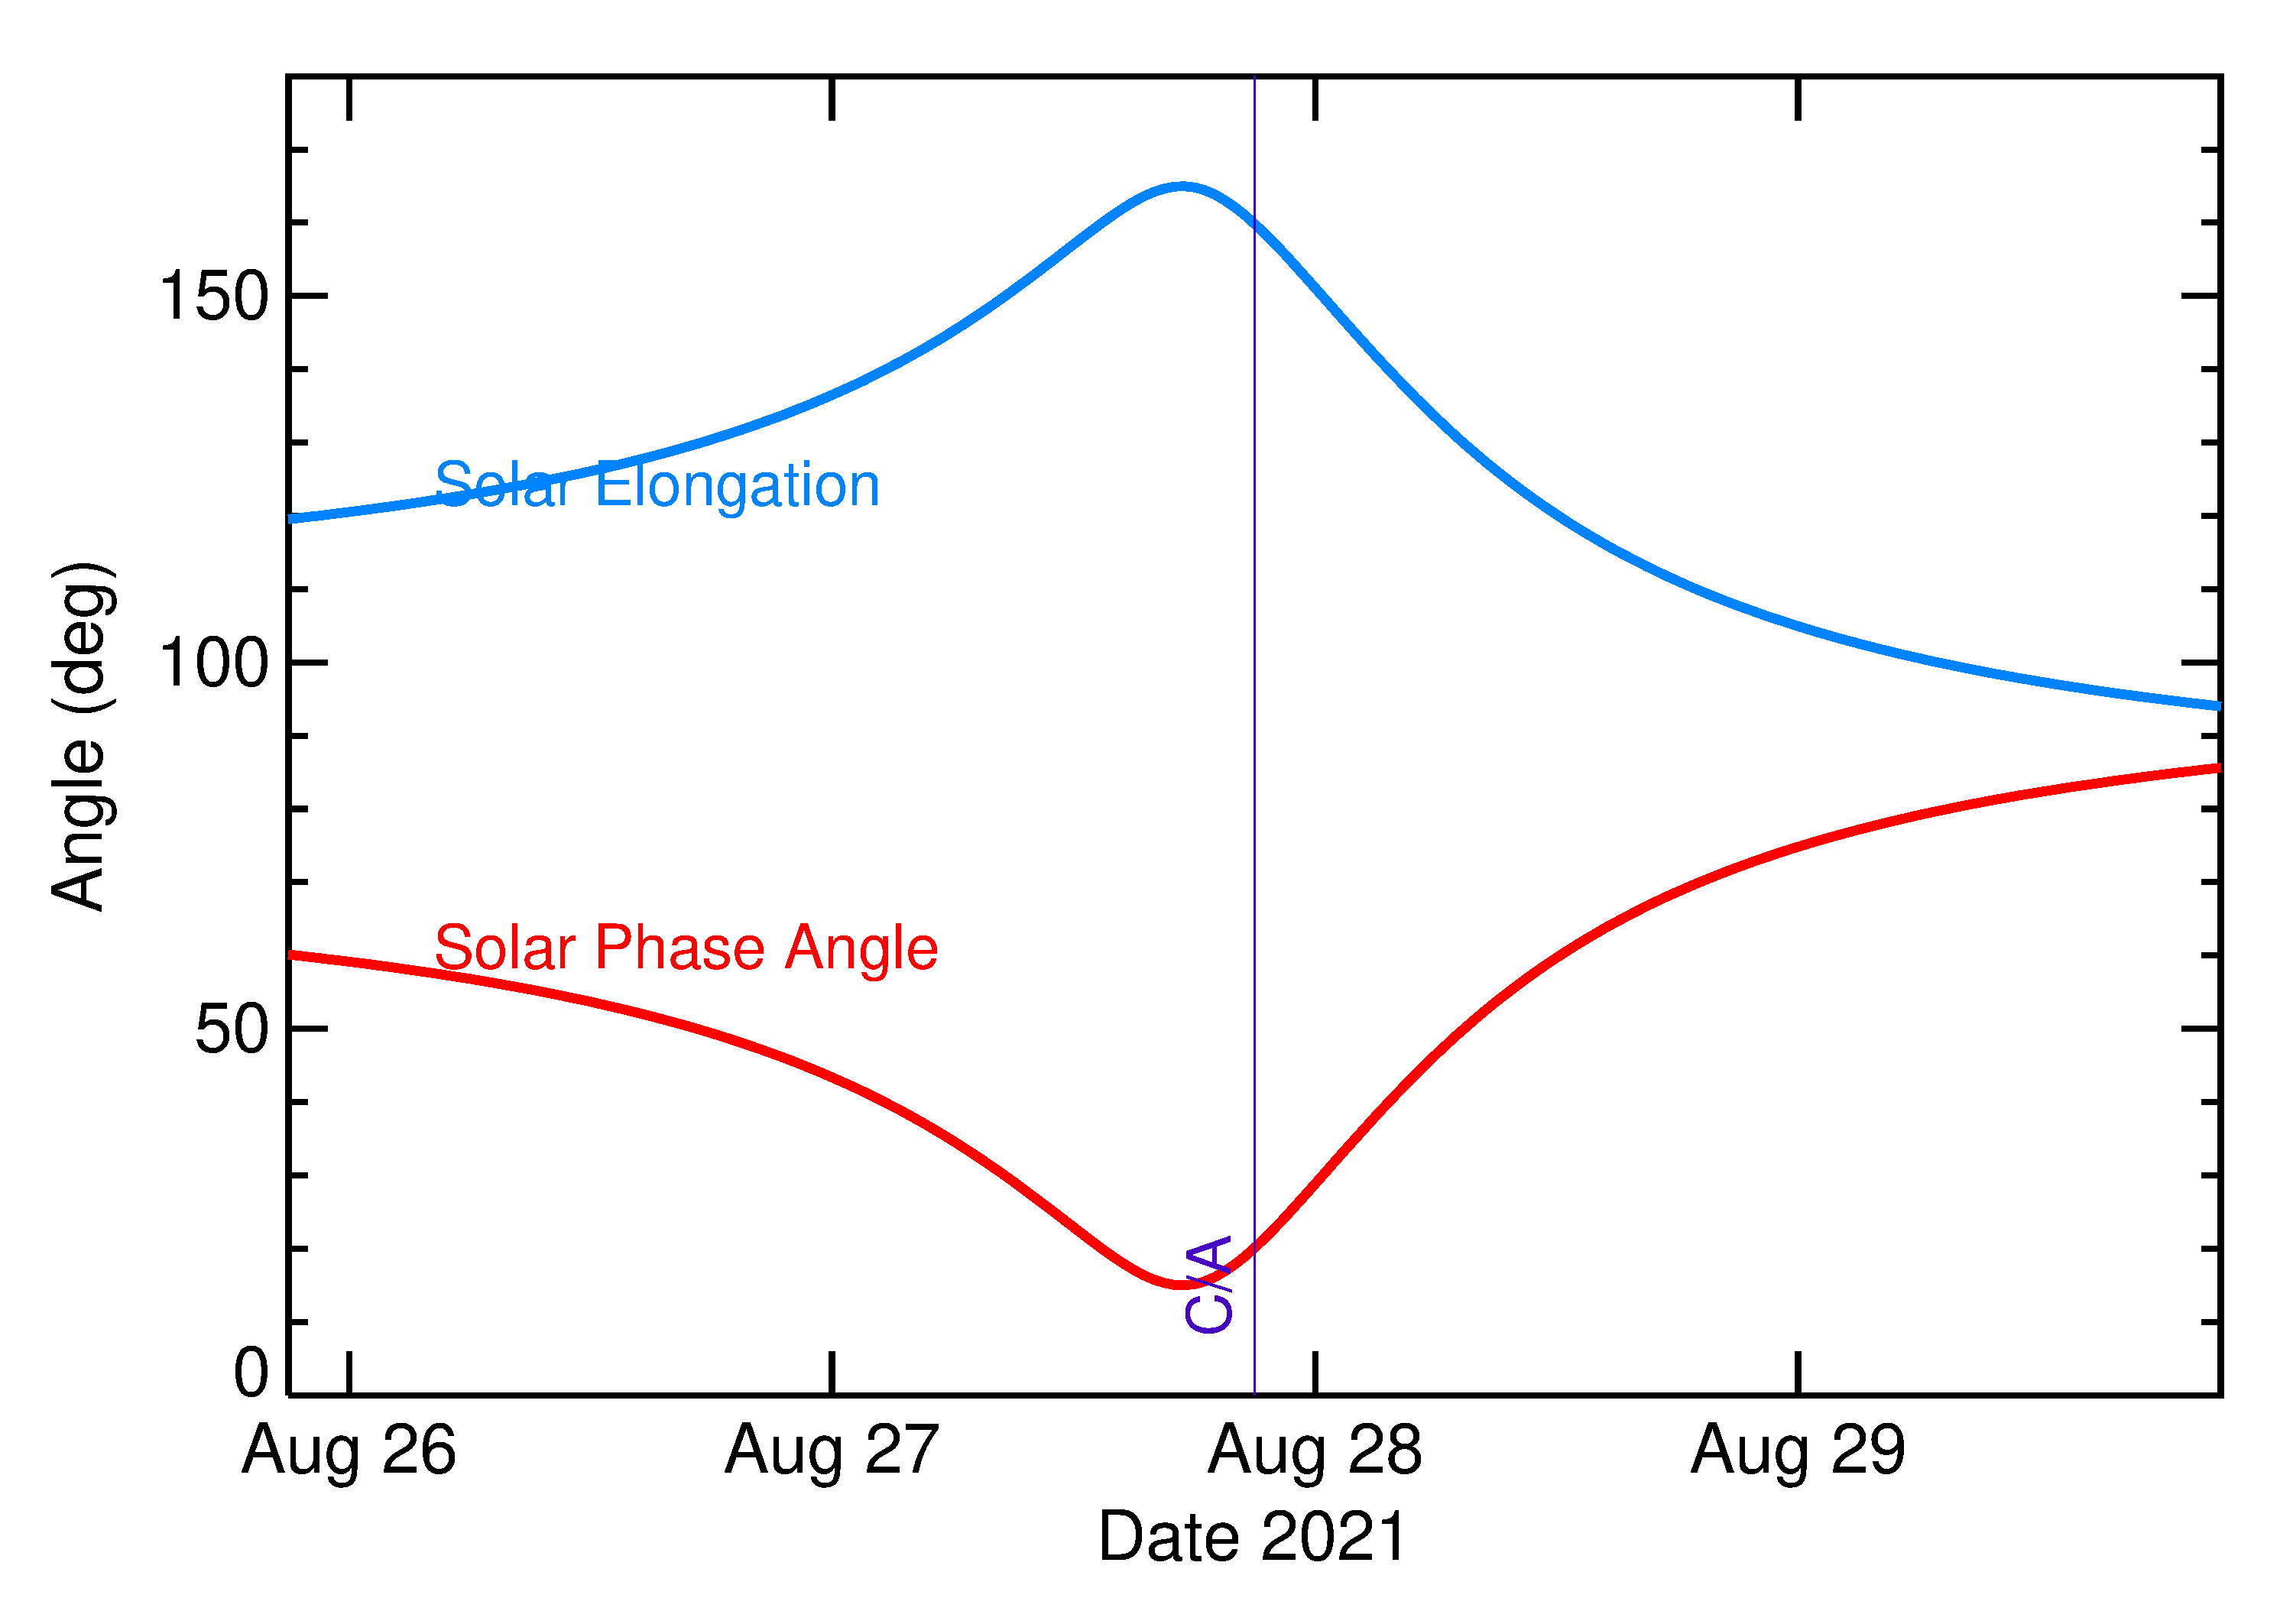 Solar Elongation and Solar Phase Angle of 2021 QD1 in the days around closest approach